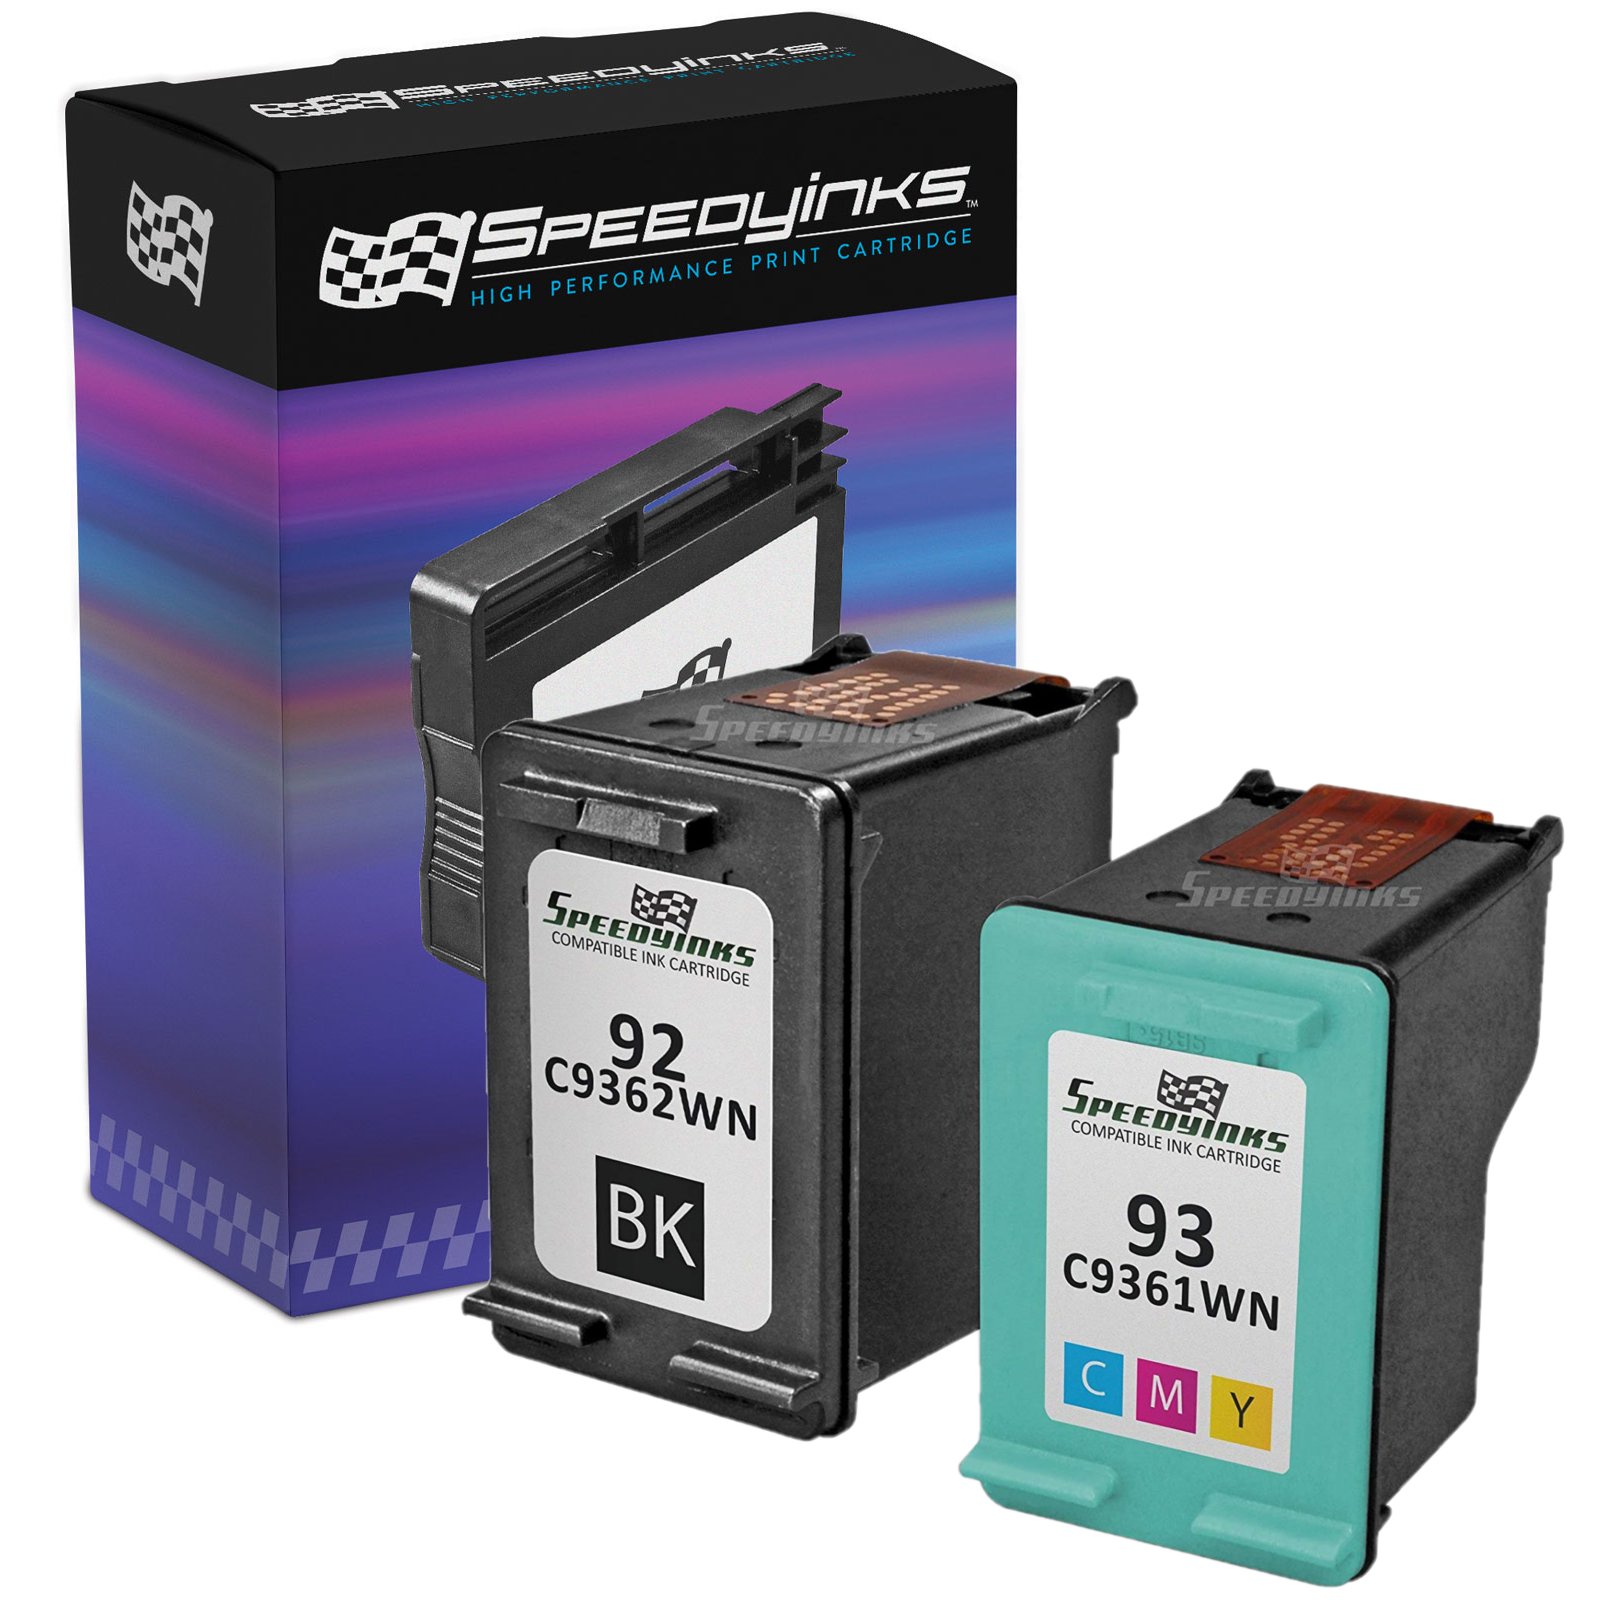 Speedy Inks - 2PK Remanufactured replacement for HP 92 C9362WN & HP 93 C9361WN Ink Cartridge Set: 1 Black & 1 Color - image 1 of 4